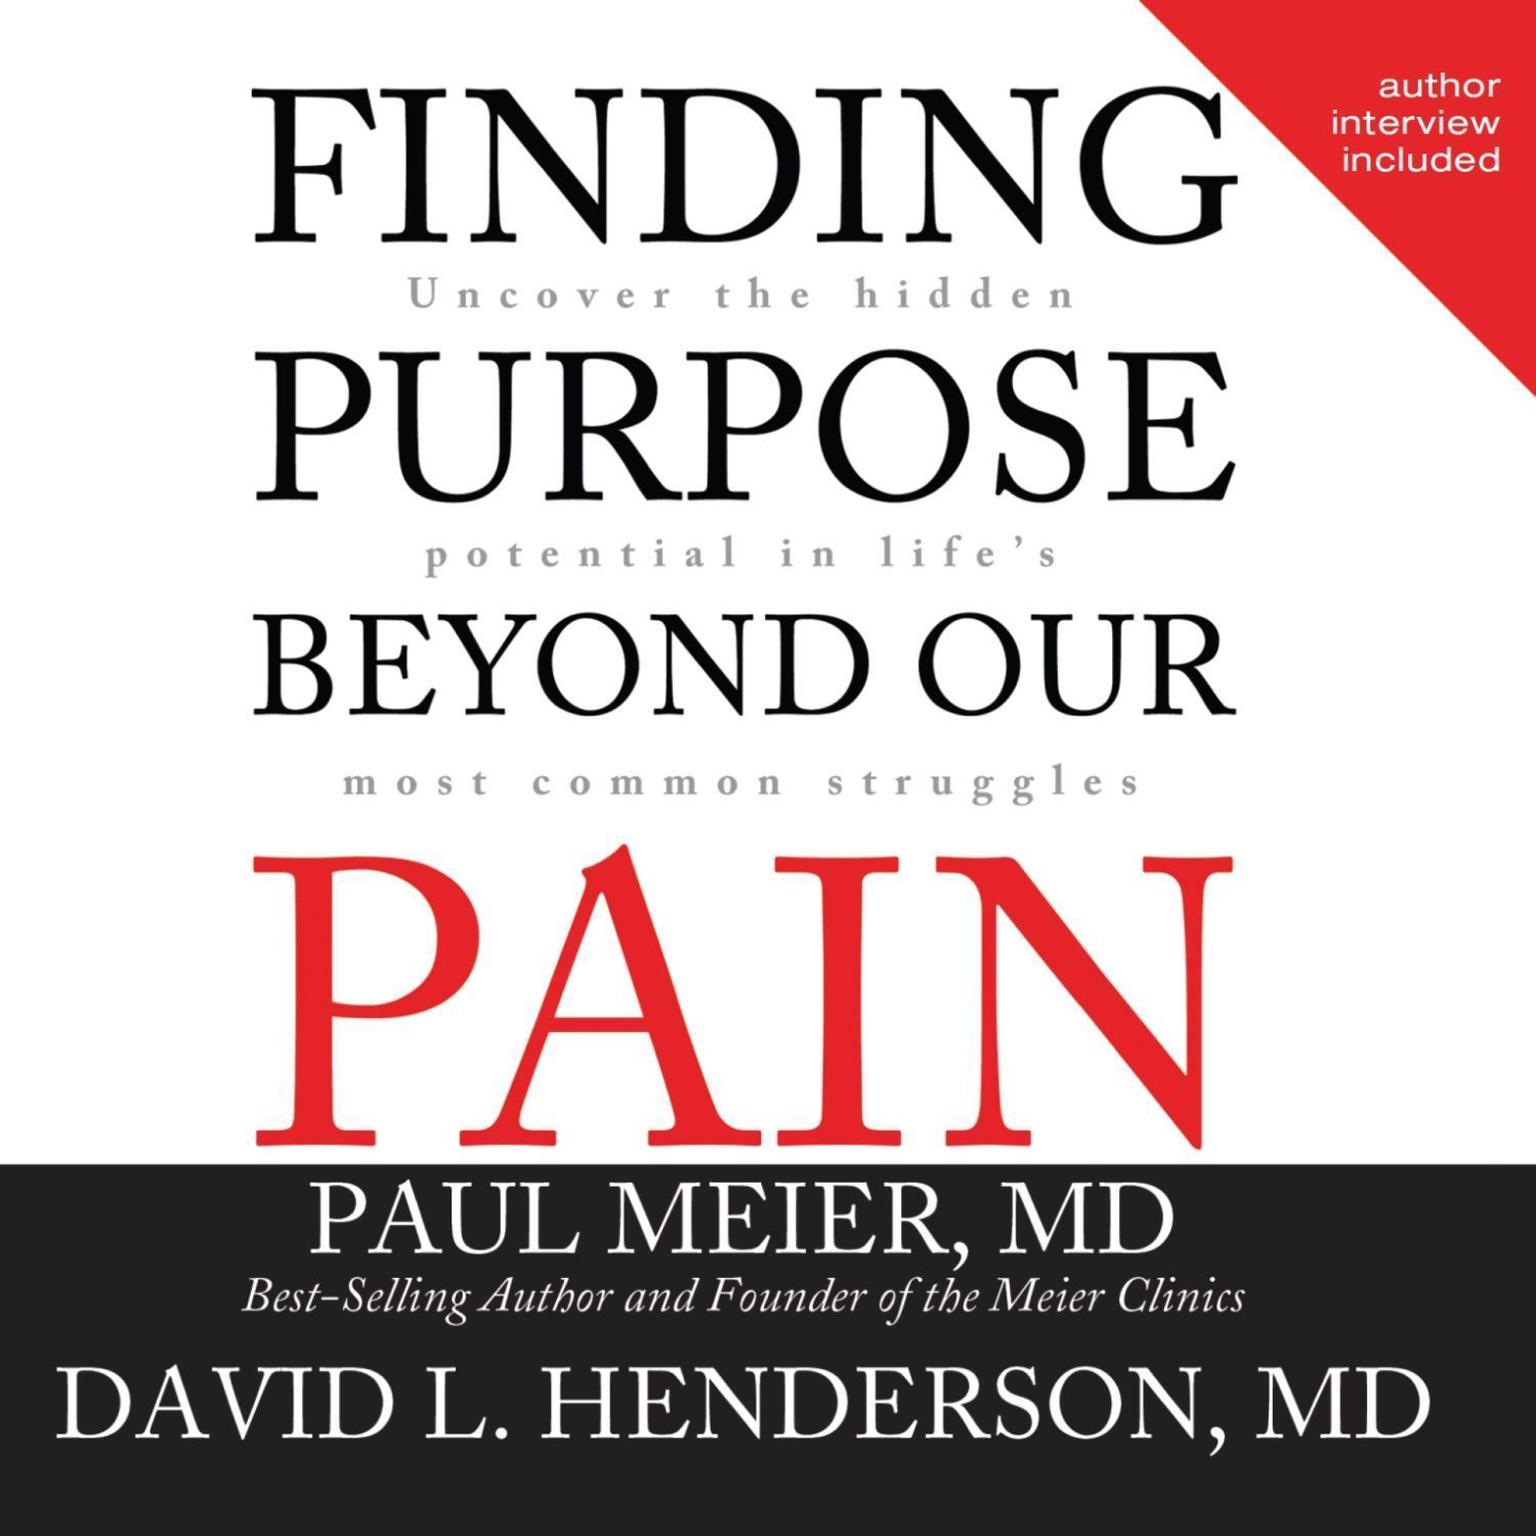 Finding Purpose Beyond Our Pain: Uncover the Hidden Potential in Lifes Most Common Struggles Audiobook, by Paul Meier